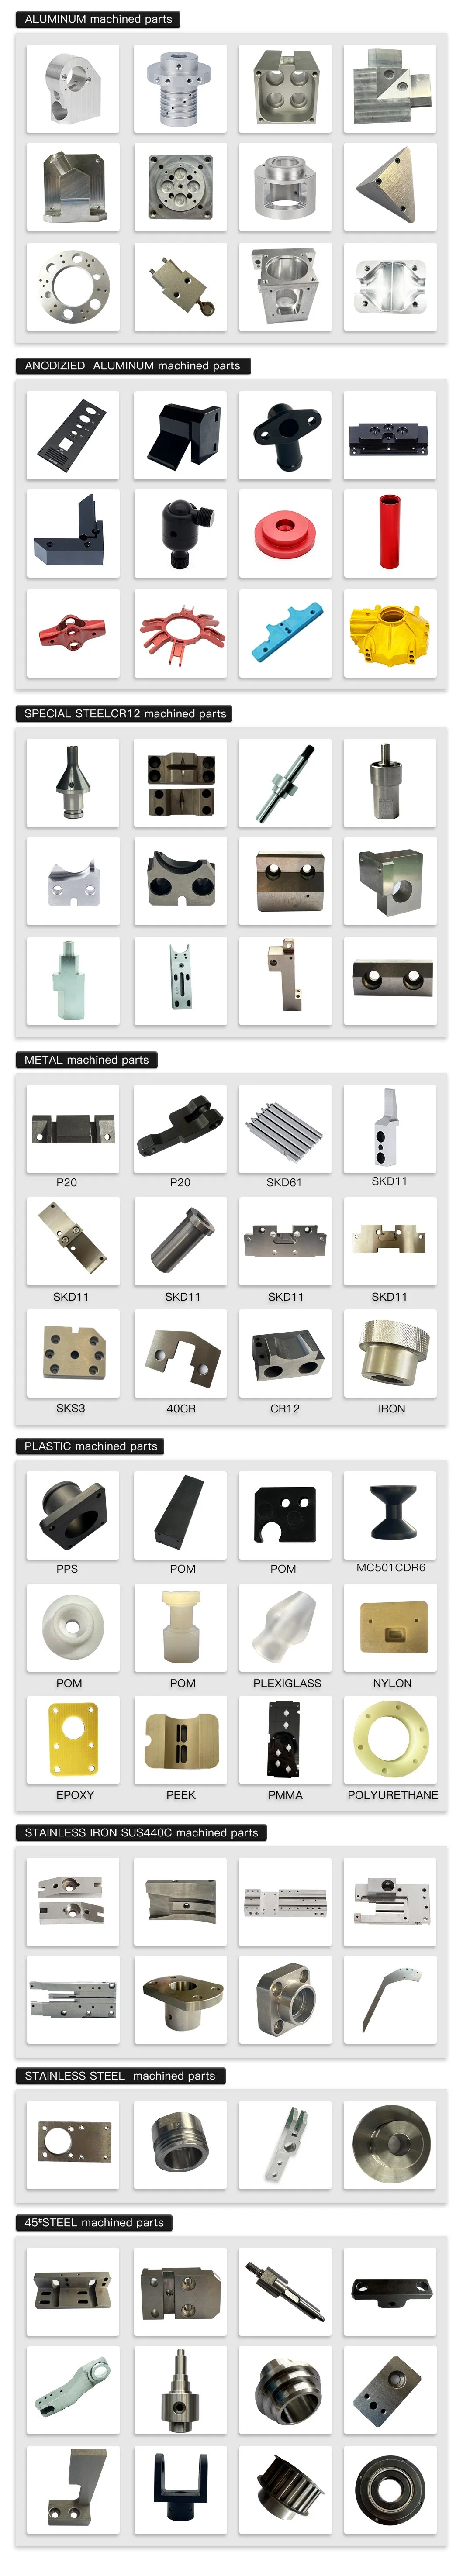 OEM Custom Small Aluminum/Metal/Brass/Stainless Steel/Plastic Part, Precision CNC Turning/Milling/Grinding/EDM/Machined/Machinery Machining Parts Manufacturer